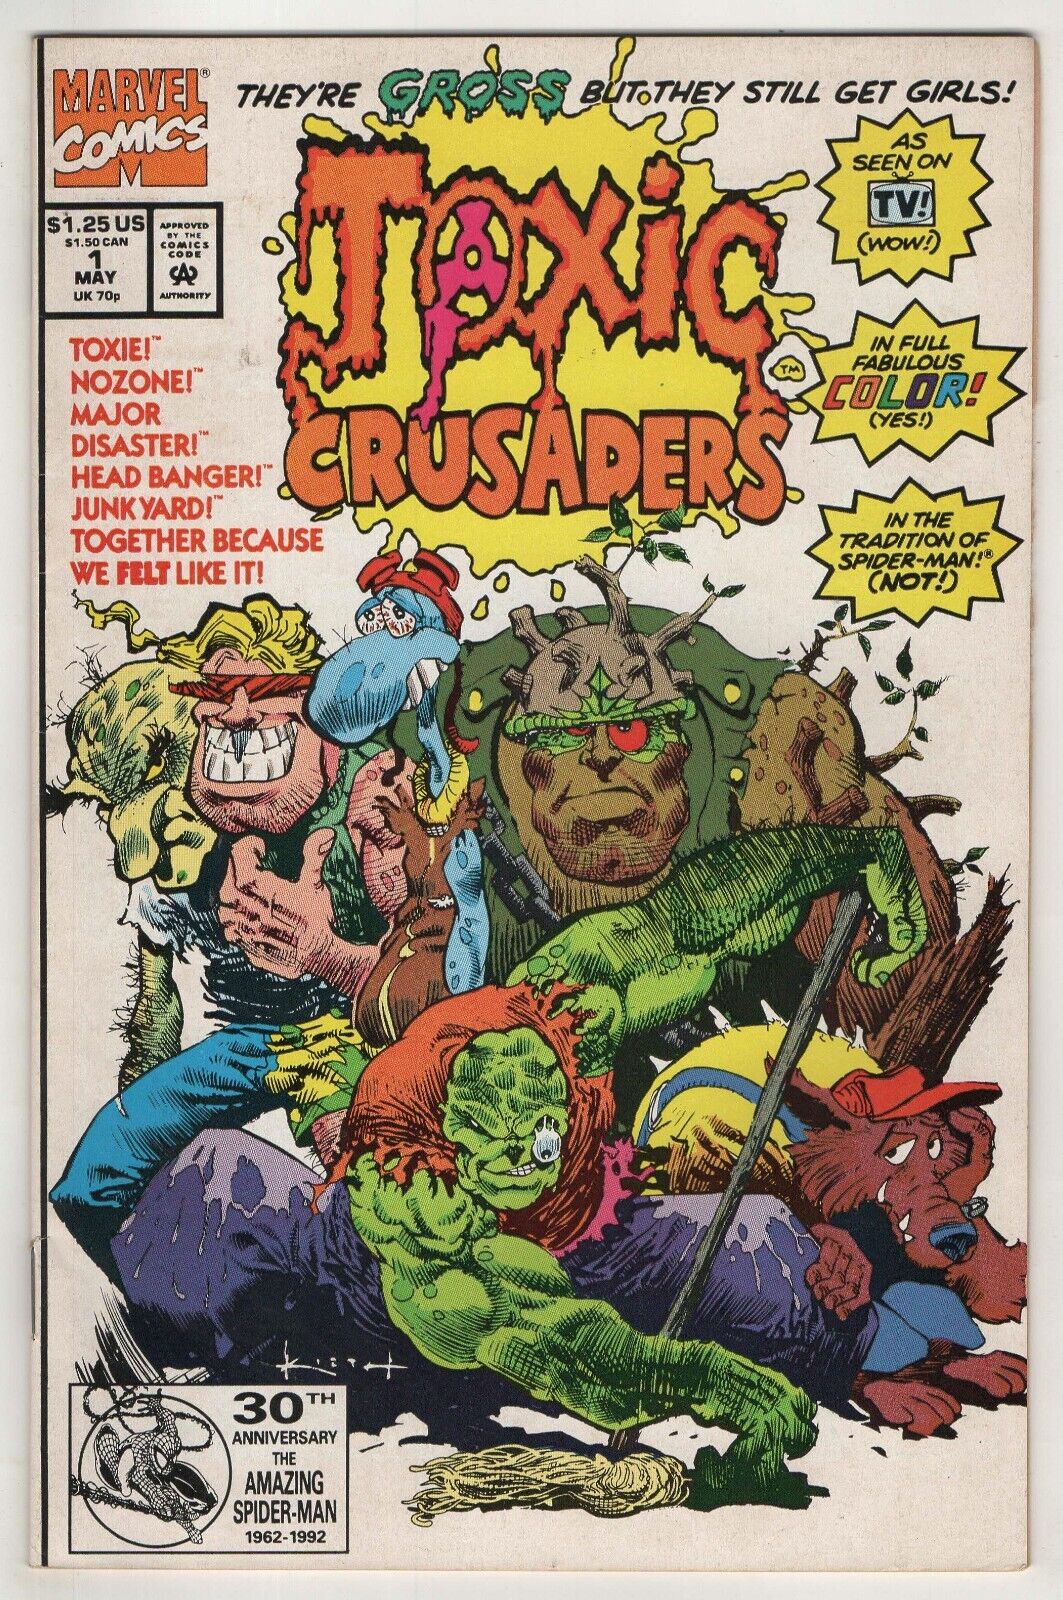 Toxic Crusaders  #1   The Making of Toxie